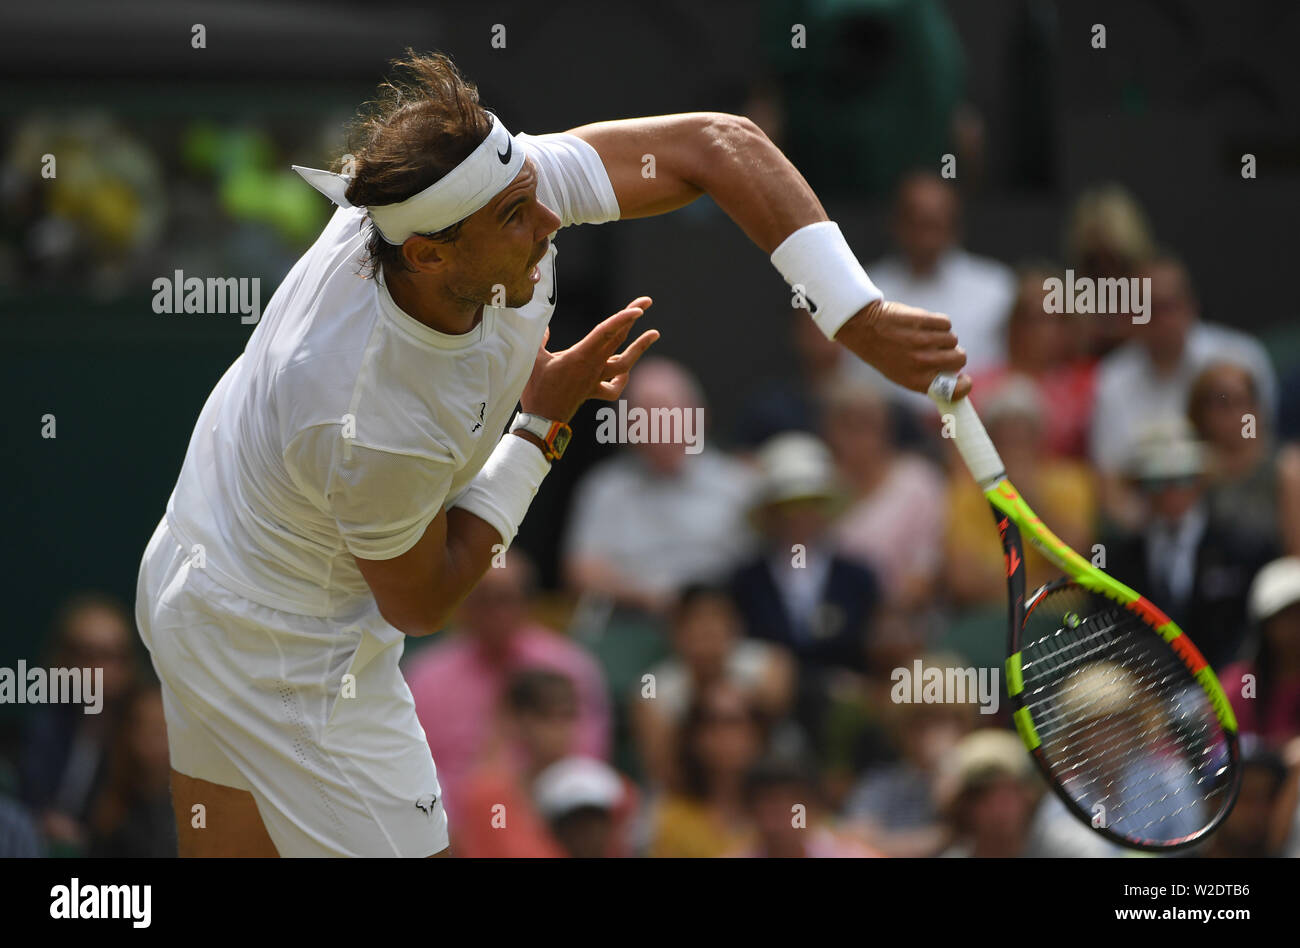 London, Britain. 8th July, 2019. Rafael Nadal of Spain competes during the men's singles fourth round match between Rafael Nadal of Spain and Joao Sousa of Portugal at the 2019 Wimbledon Tennis Championships in London, Britain, on July 8, 2019. Credit: Lu Yang/Xinhua/Alamy Live News Stock Photo